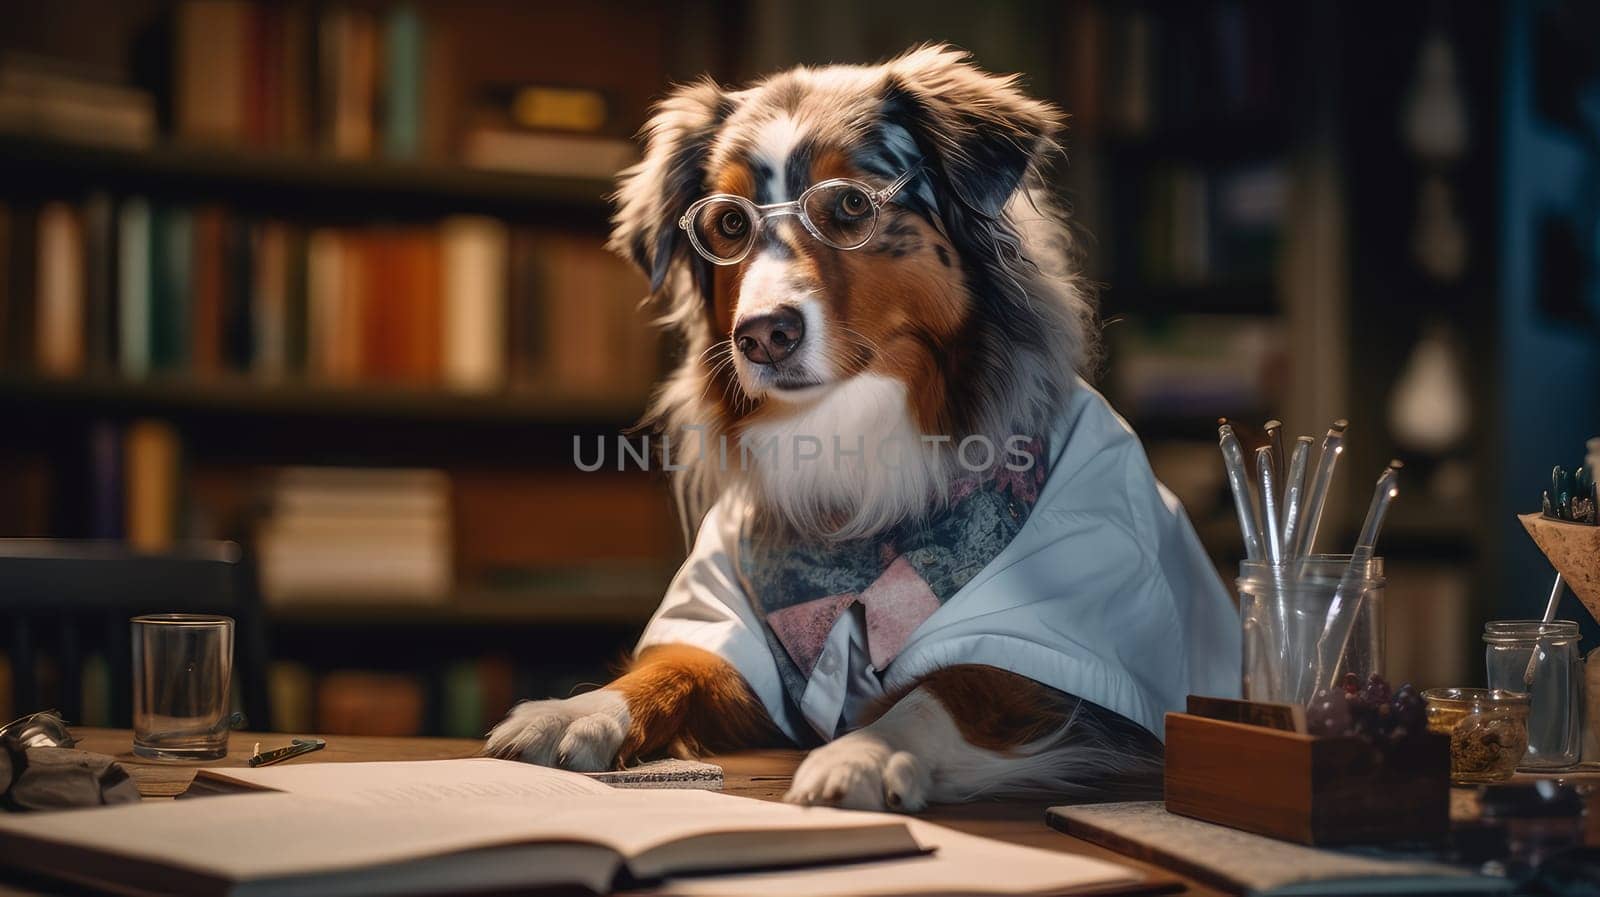 A cat in a doctor's dog sits at the table and prescribes medications at a veterinary pharmacy. Concept of care and care for pets